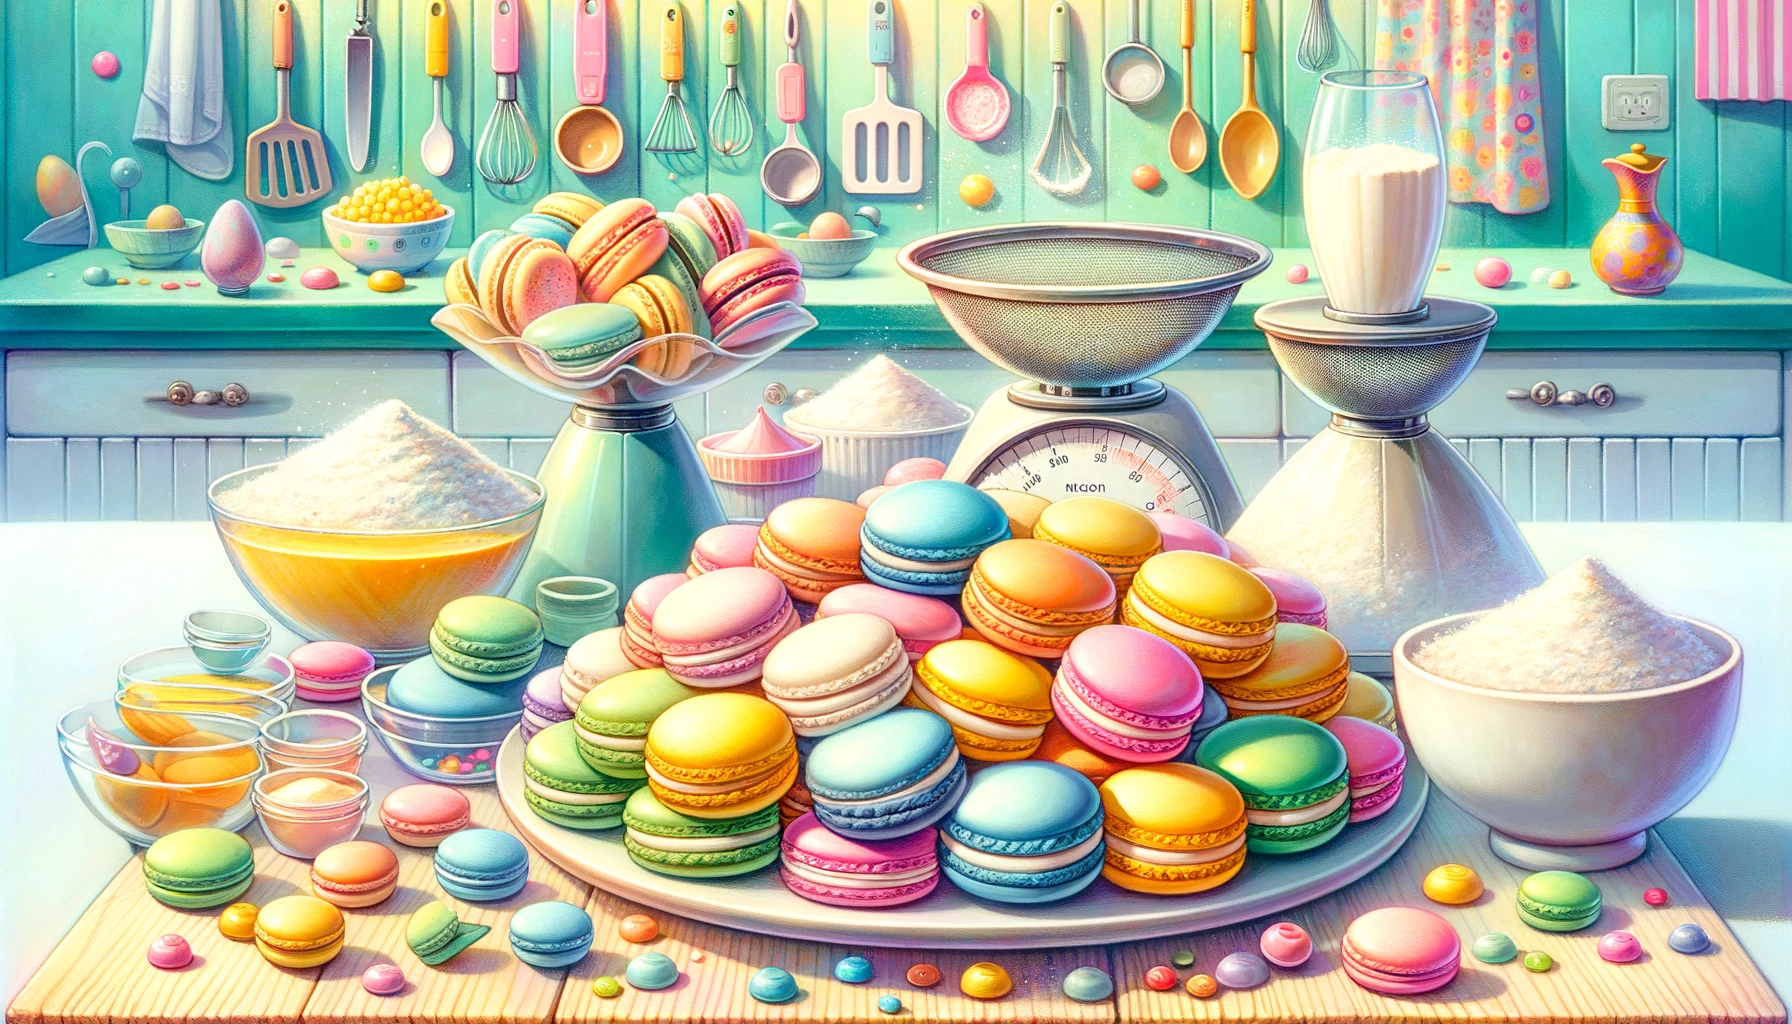 colorful macarons in pastel shades, some finished and elegantly arranged, and others in the process of being made